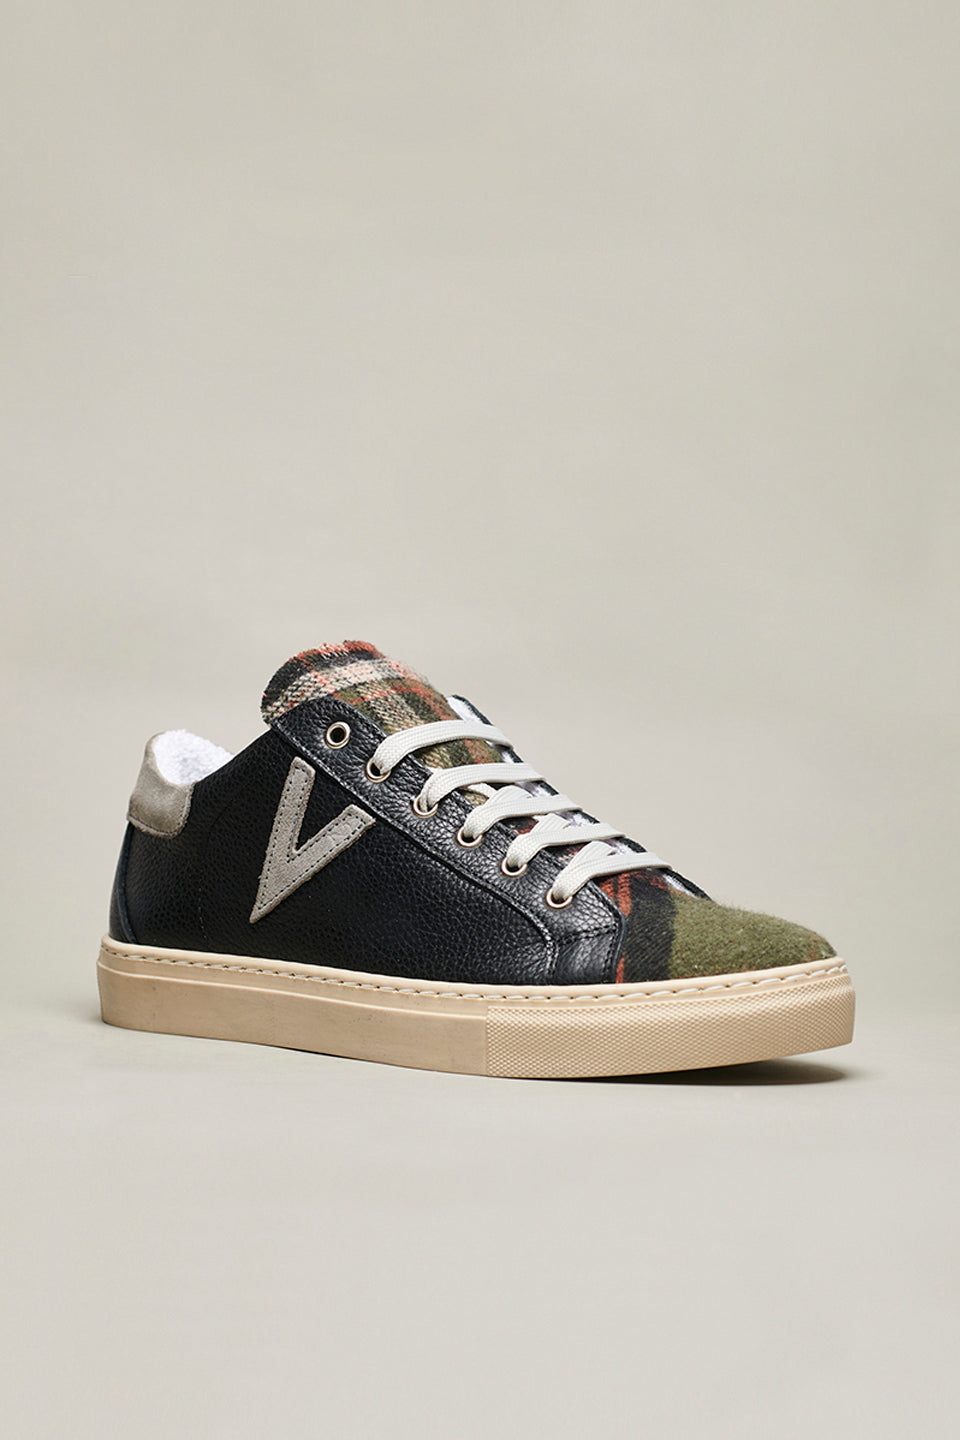 OLYMPIC - Low sole sneakers in black textured leather with green tartan fabric tongue